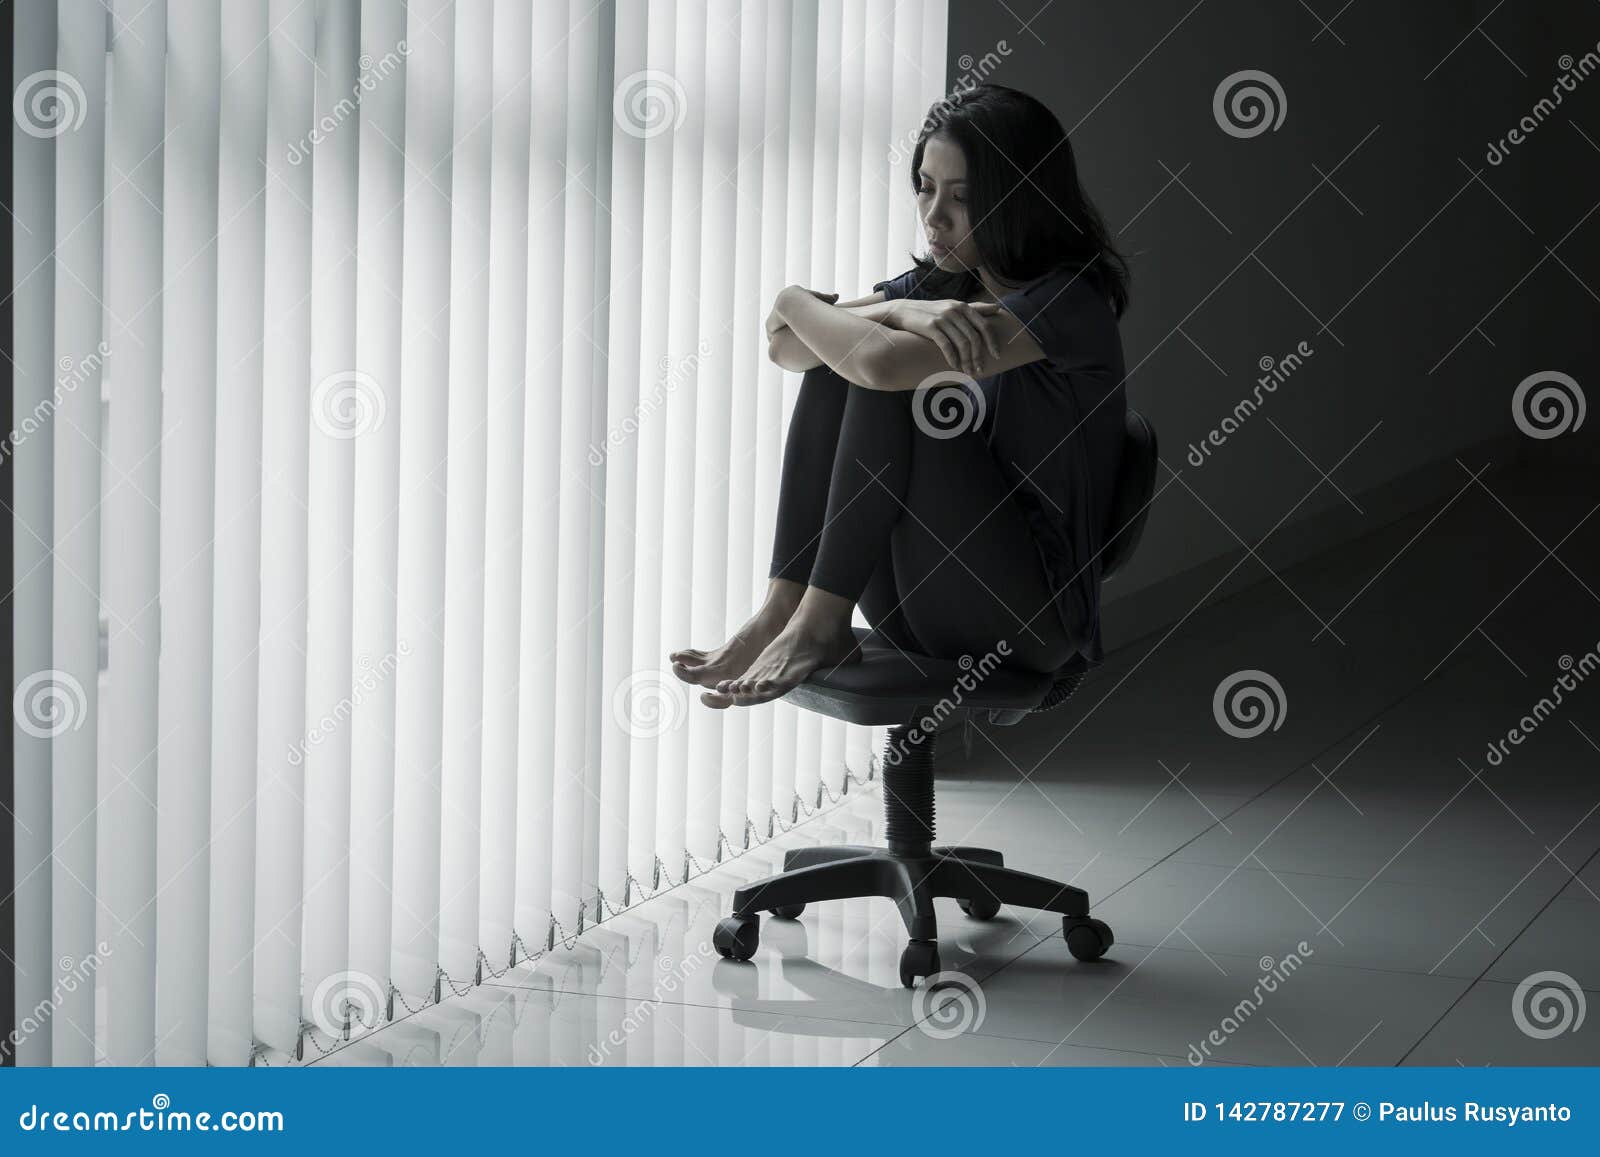 Lonely Woman Sitting on the Chair Stock Image - Image of japanese, chair:  142787277